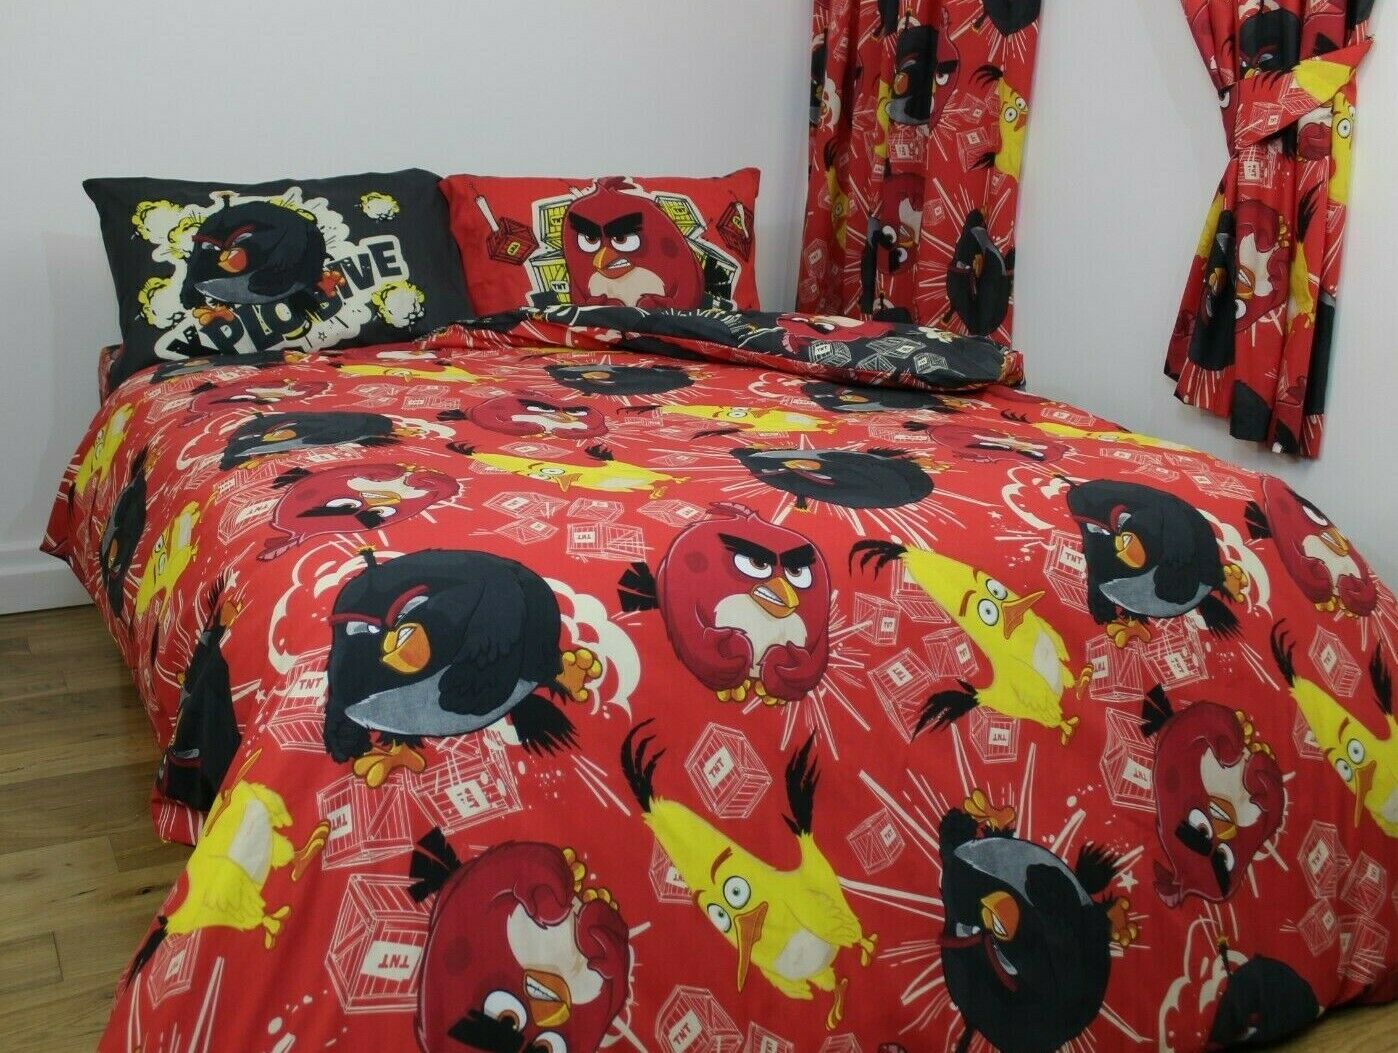 WHOLESALE PRICE FOR x 10 Double Bed Angry Birds TNT Red Black Reversible Duvet Cover Set Character Bedding